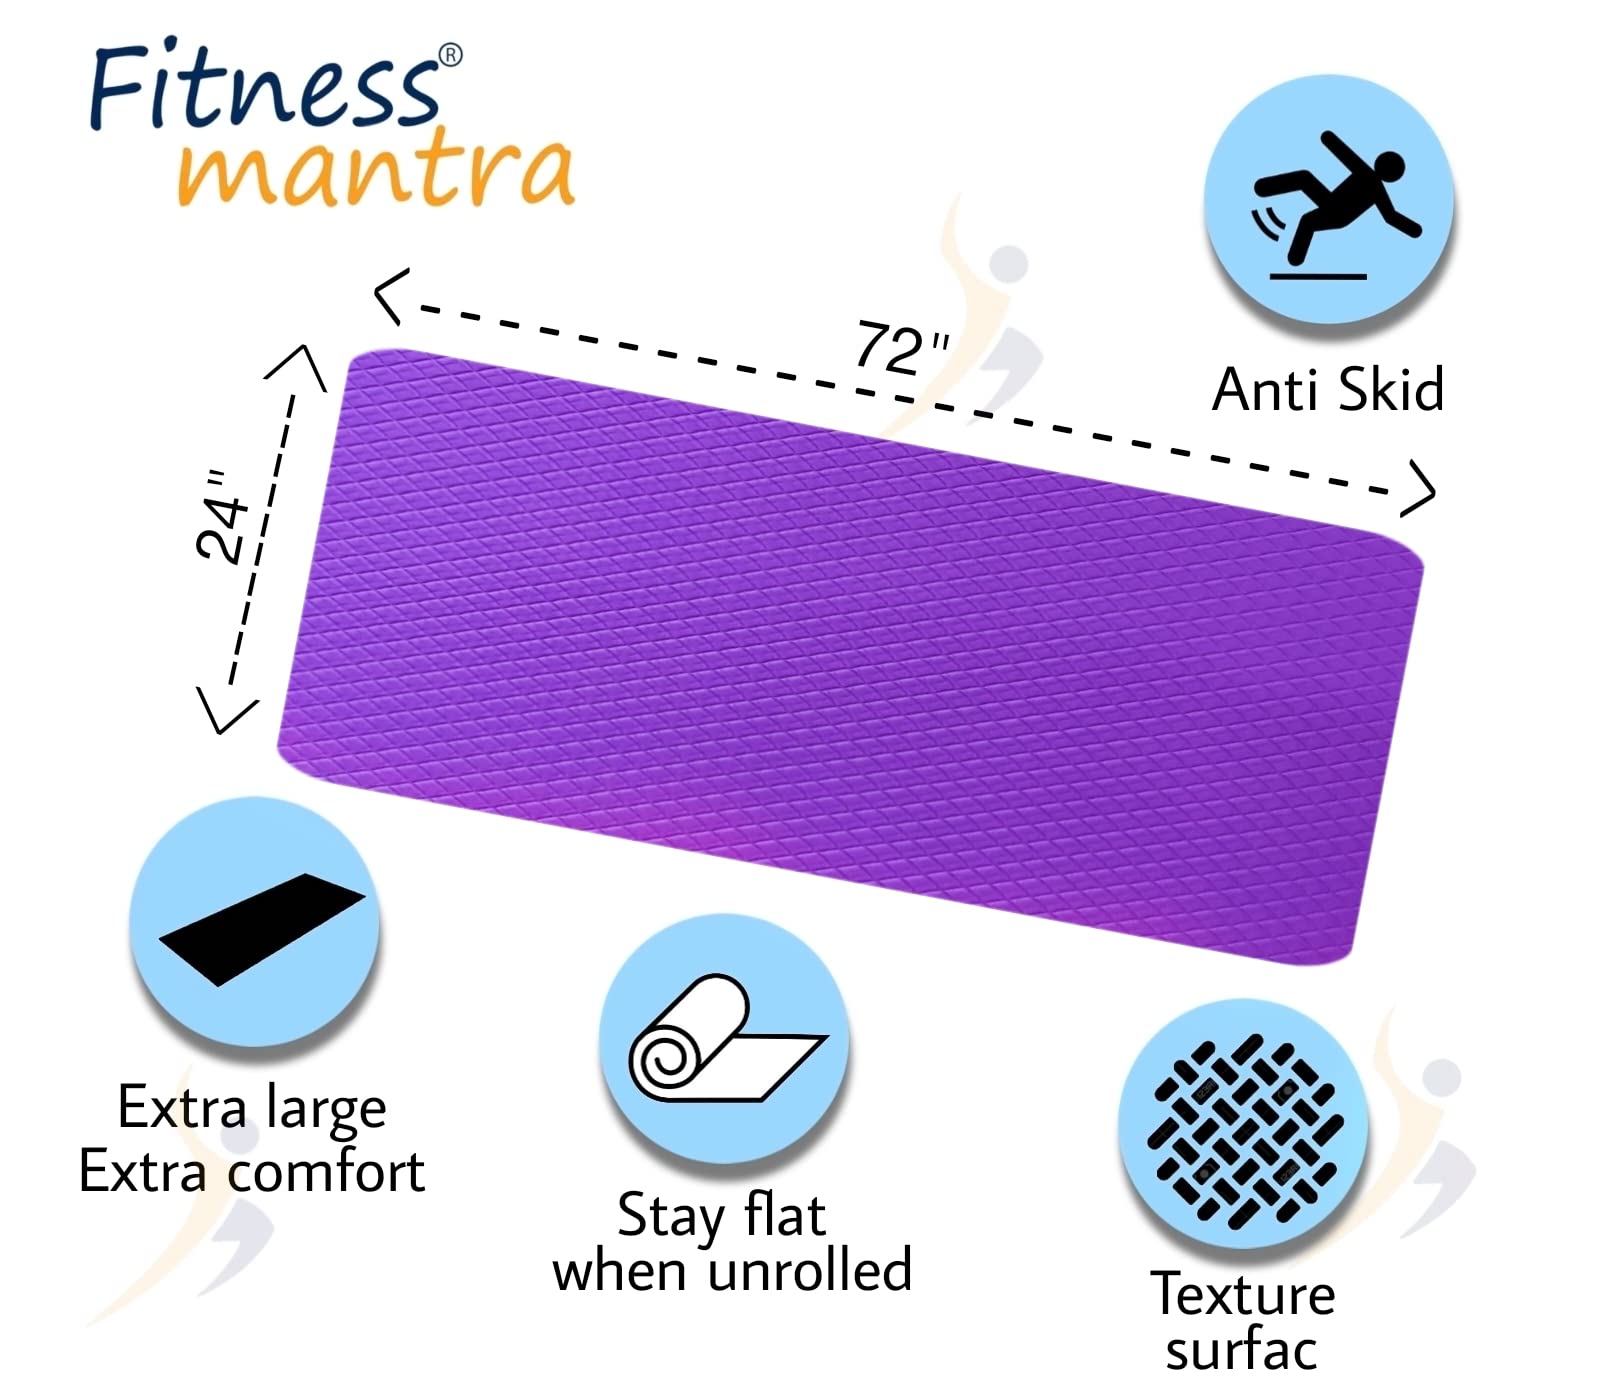 Fitness Mantra® Yoga Mat for Gym Workout and Yoga Exercise with 4mm Thickness, Anti-Slip Yoga Mat for Men & Women Fitness (Qnty.-1 Pcs.) (Purple)(4mm) - Gymom Wellness Warehouse 